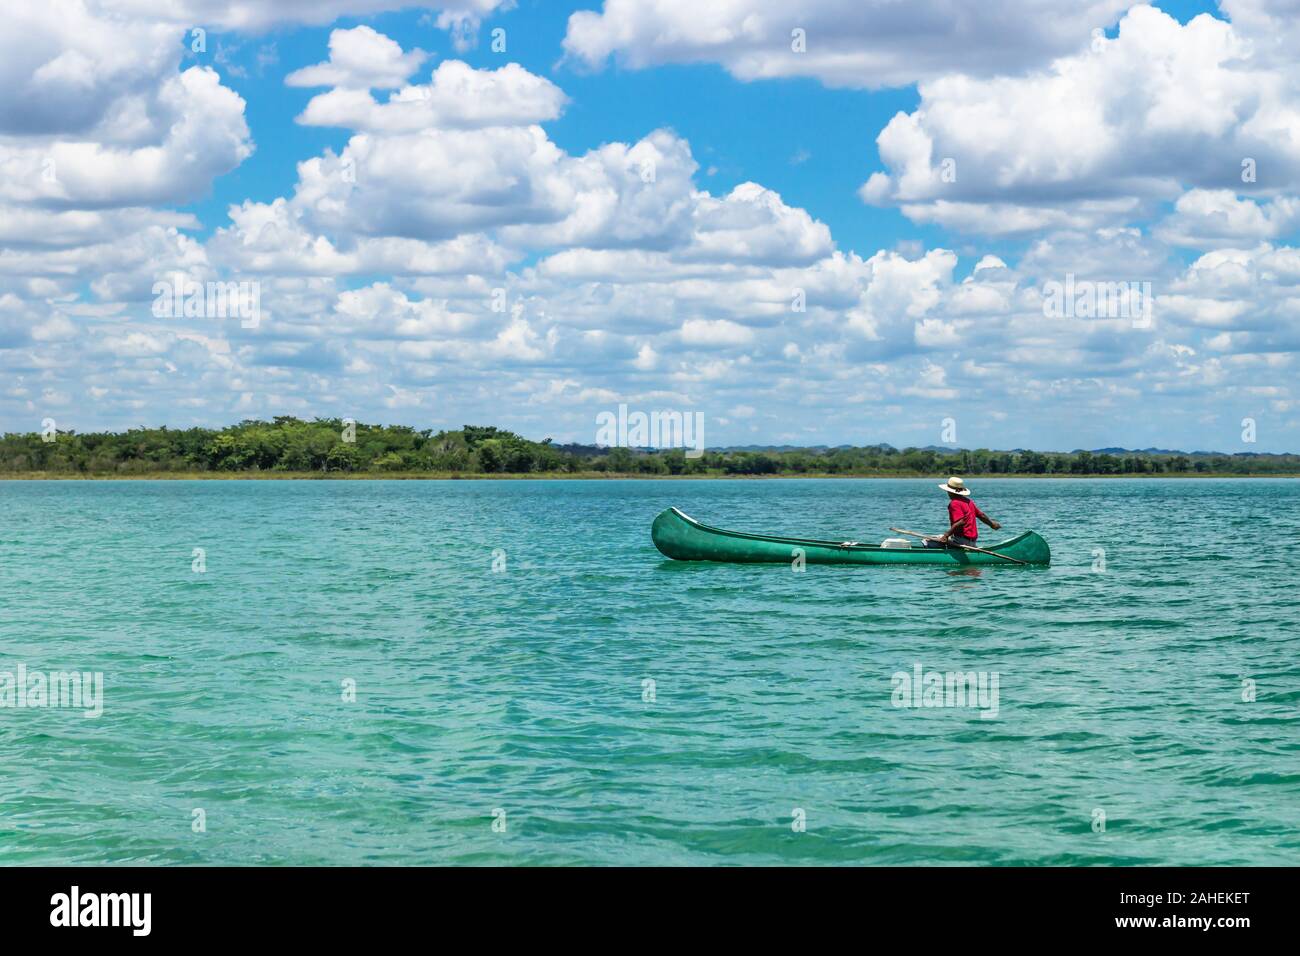 El Remate, Peten, Guatemala - 29 May 2019: Fisherman in canoe boat in turquoise colored lake Itza with sunny cloud sky Stock Photo